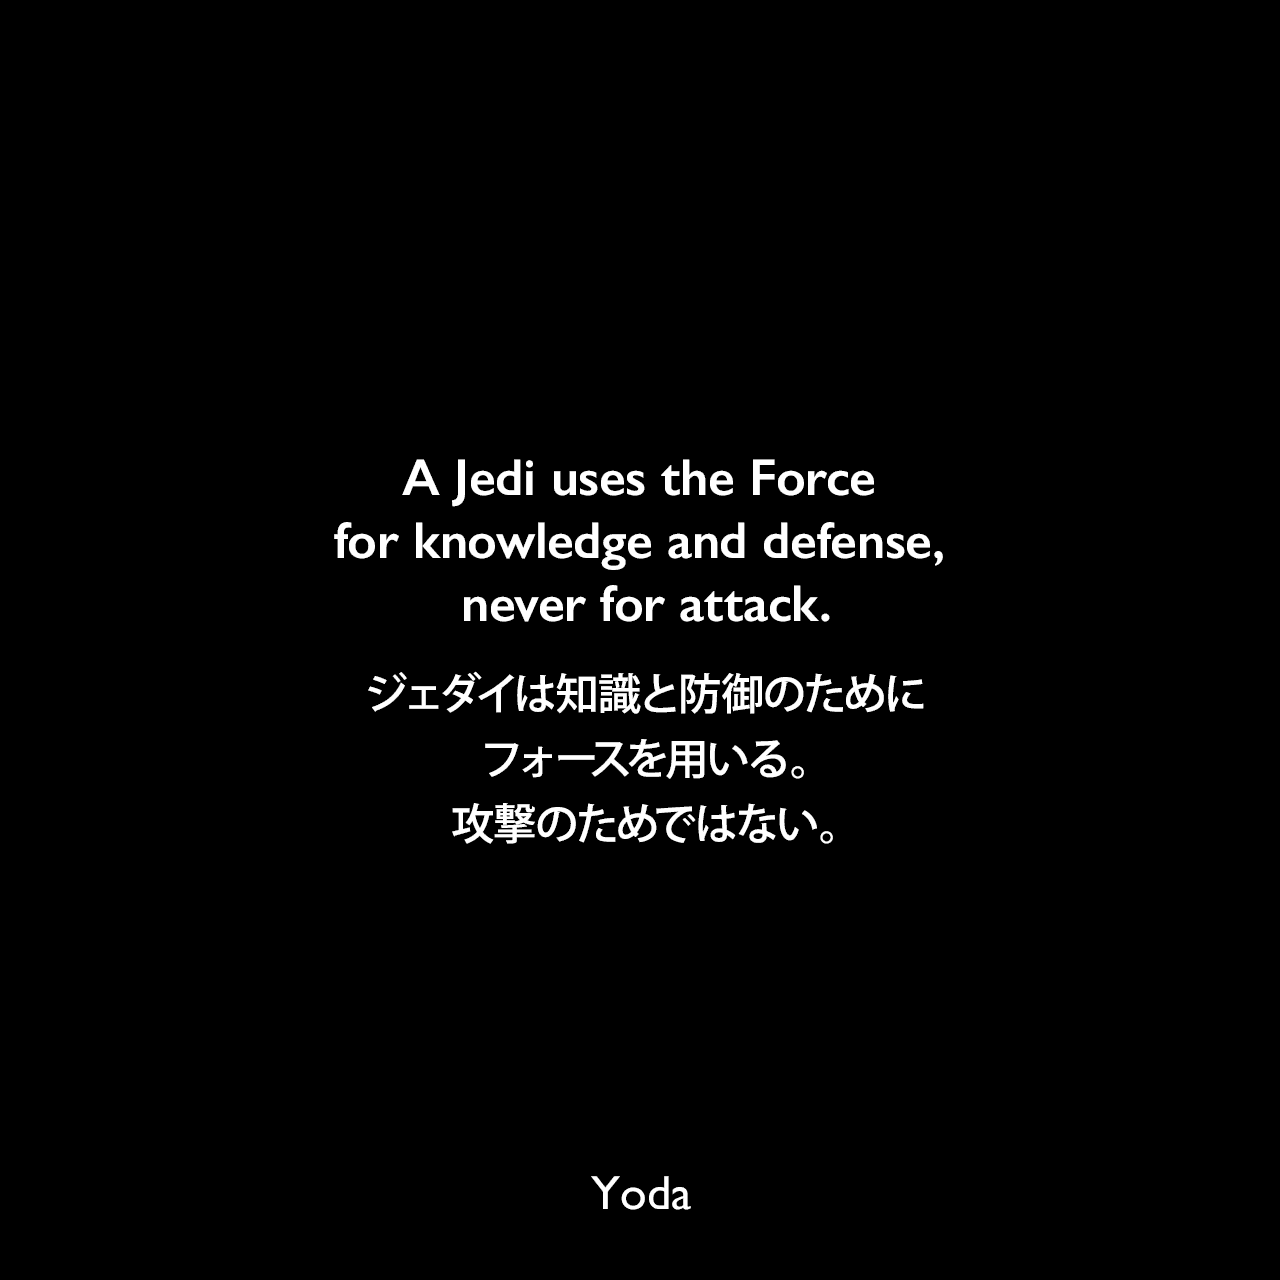 A Jedi uses the Force for knowledge and defense, never for attack.ジェダイは知識と防御のためにフォースを用いる。攻撃のためではない。- スター・ウォーズ エピソード5/帝国の逆襲Yoda